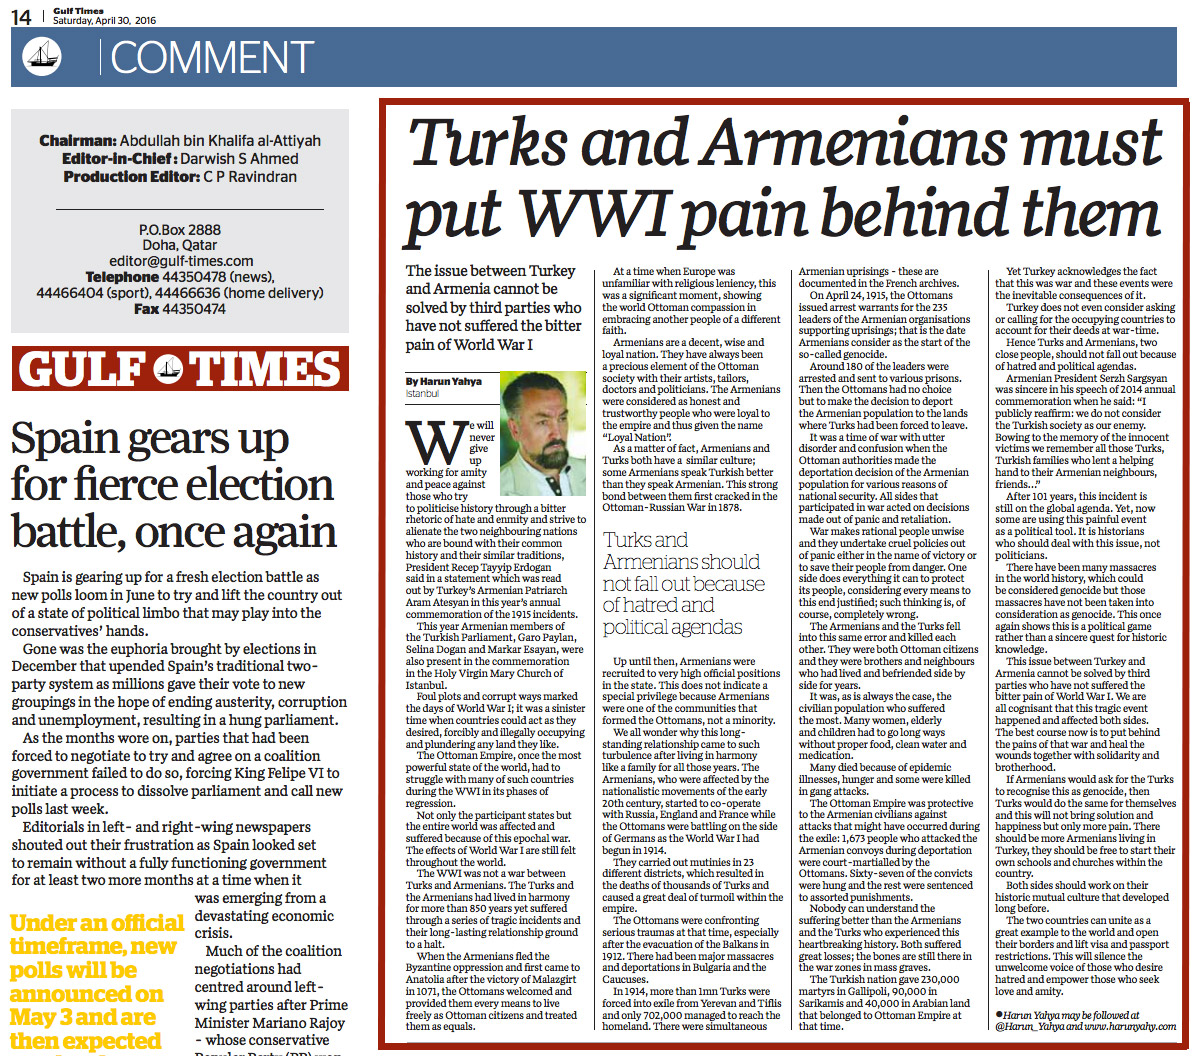 Turks and Armenians must put WWI pain behind them 